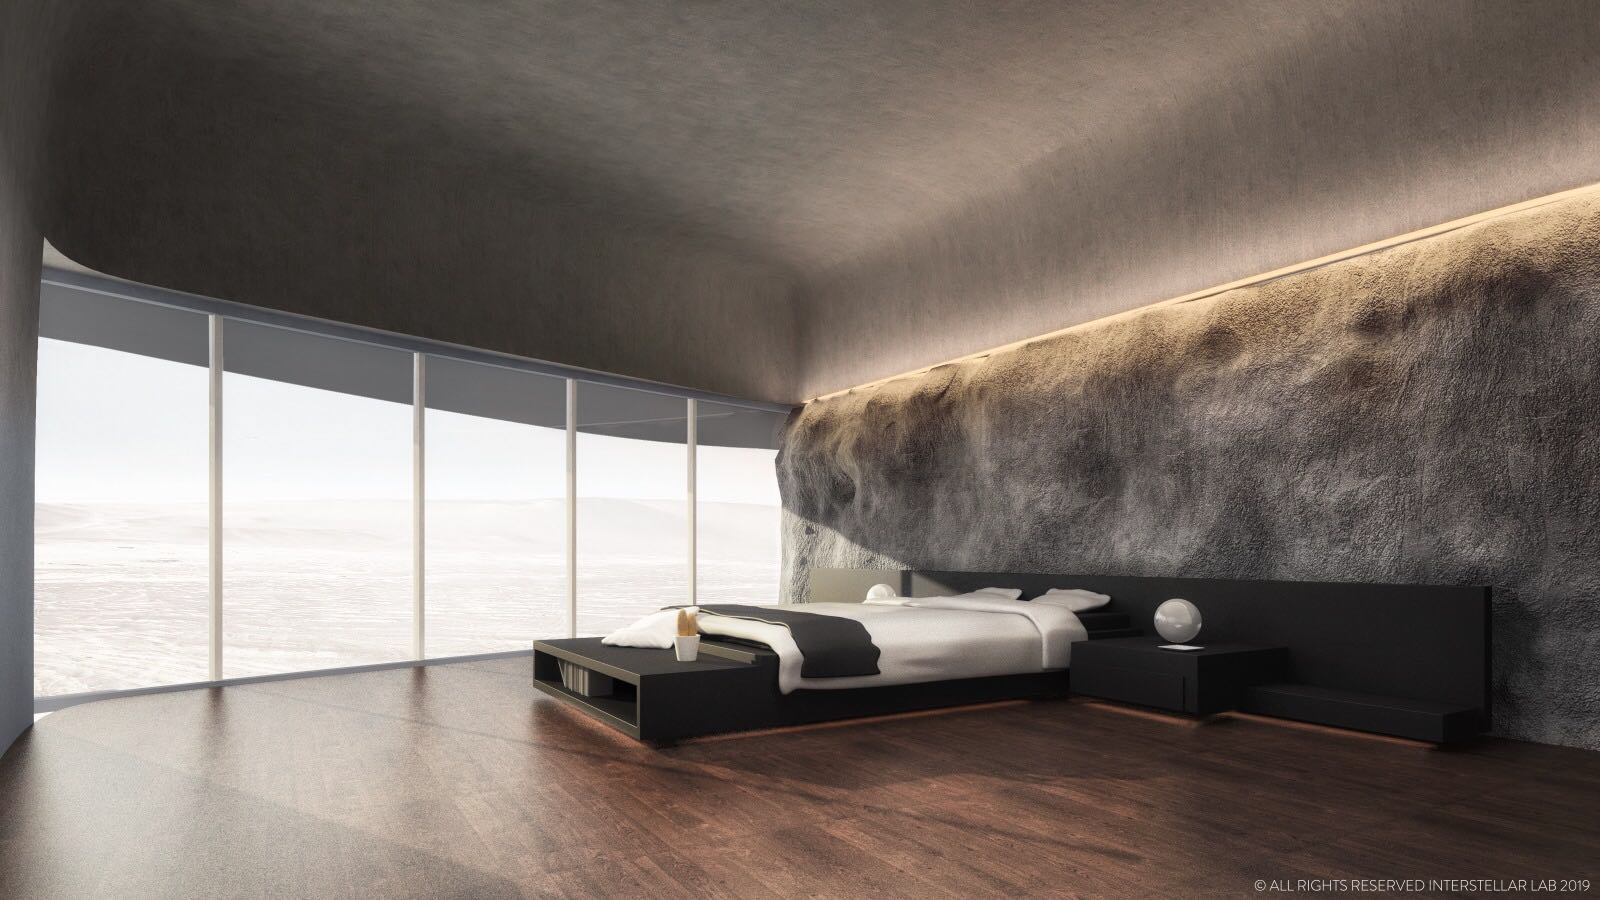 A minimalist room with dark-wood floors, floor-to-ceiling windows, a bed with a black frame, and tufted grey material on the wall behind the headboard